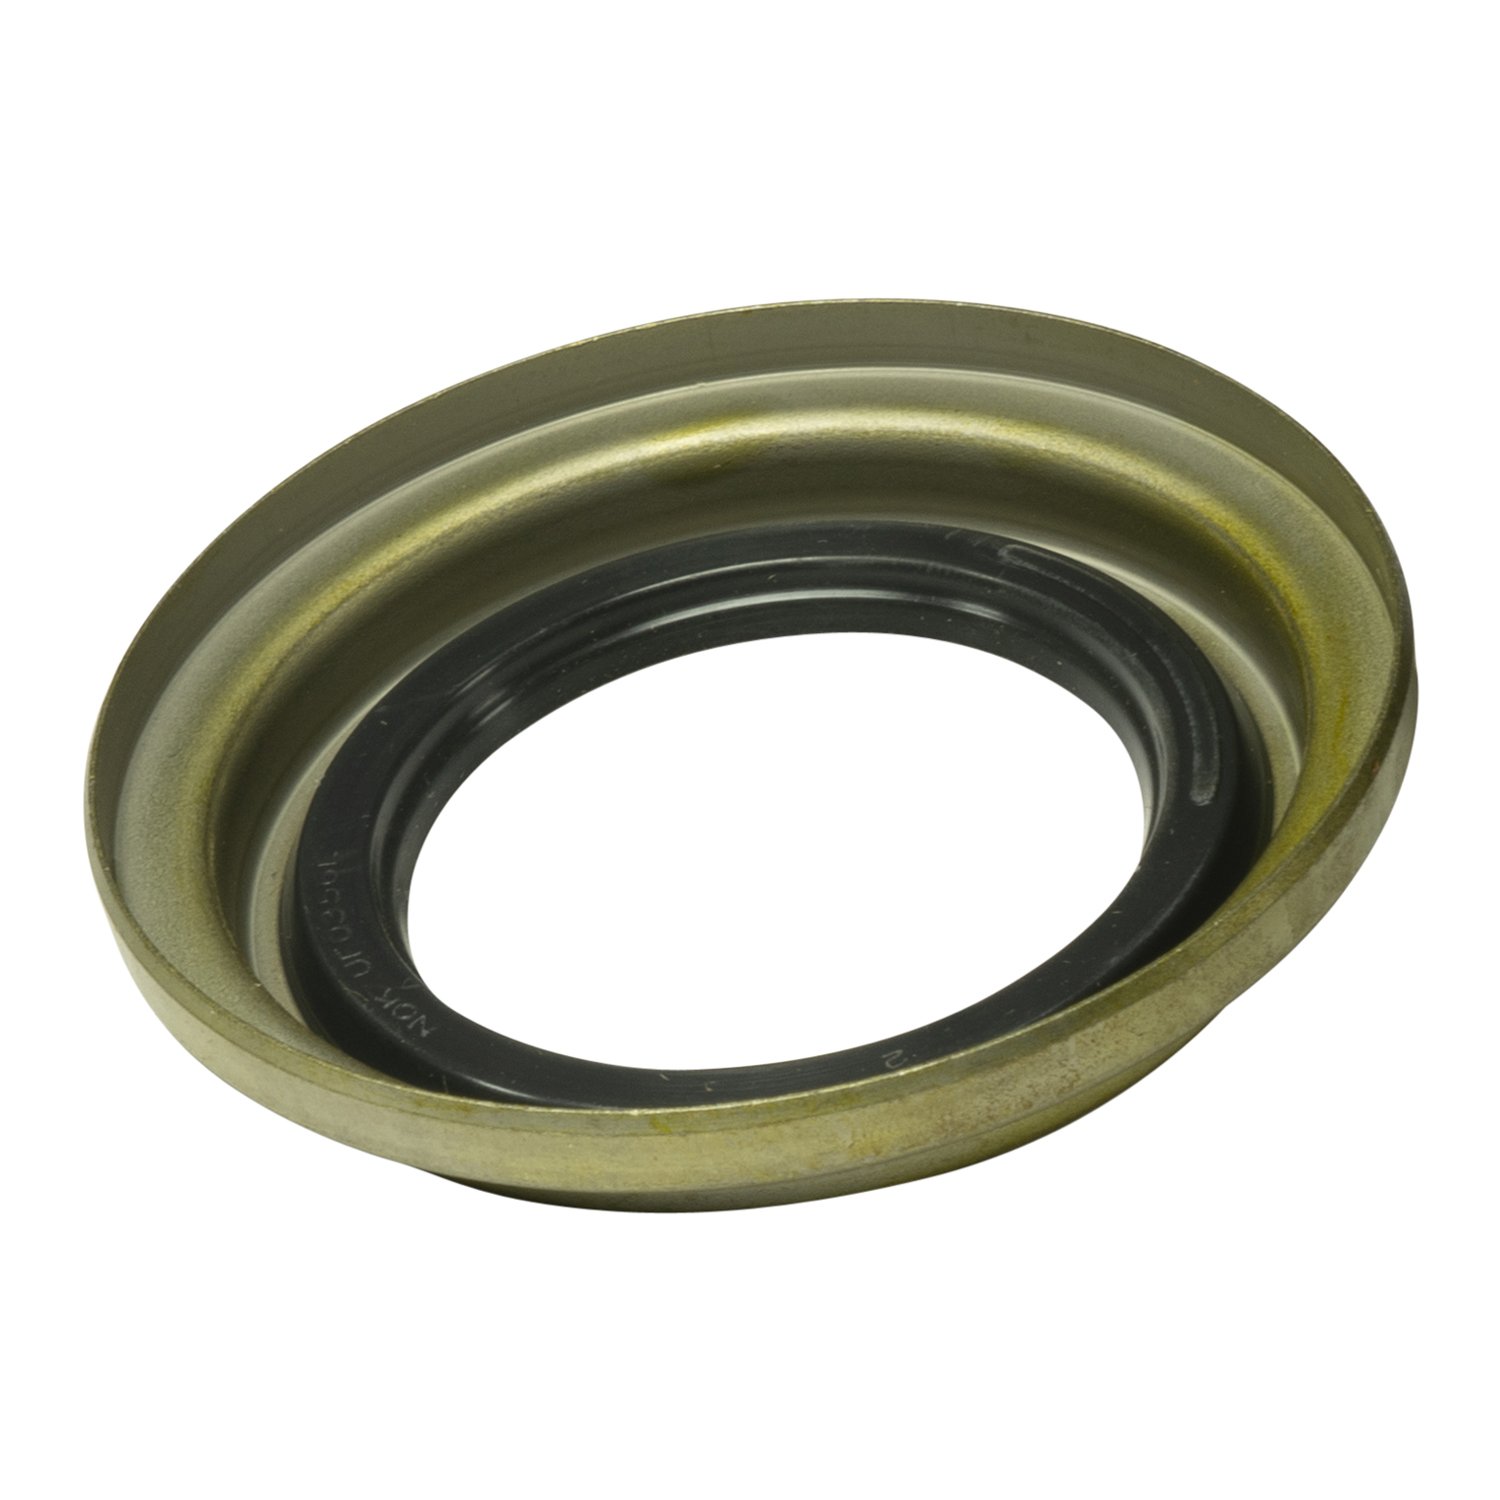 Replacement lower king-pin seal for 80-93 GM Dana 60 